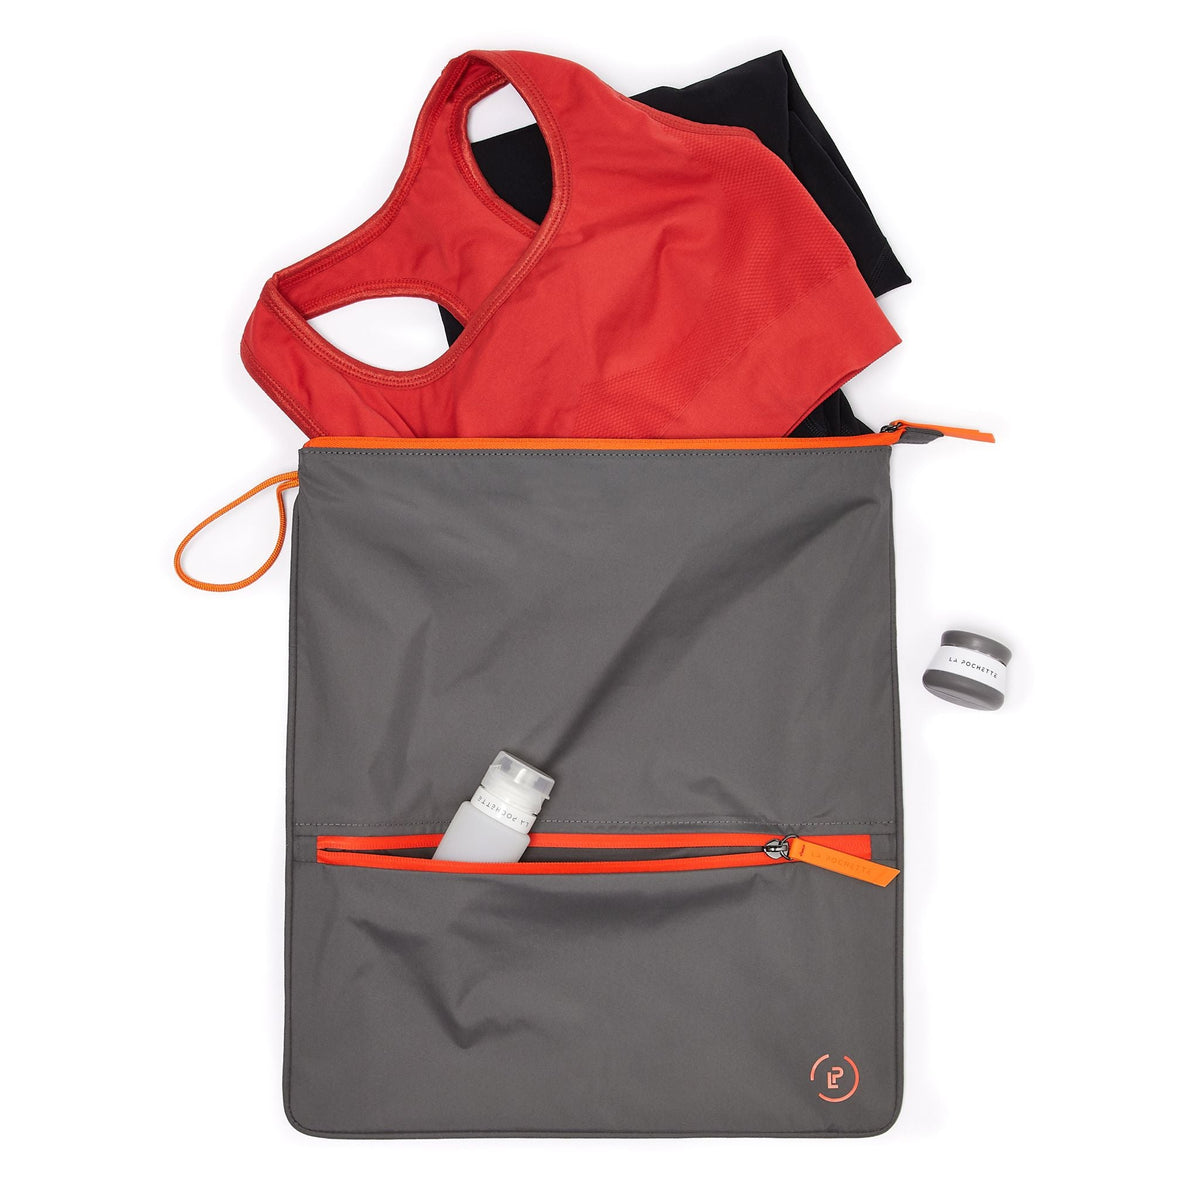 Pewter Flame Sweat Bag showing travel bottle in front pocket, travel pot, and workout kit in main pocket